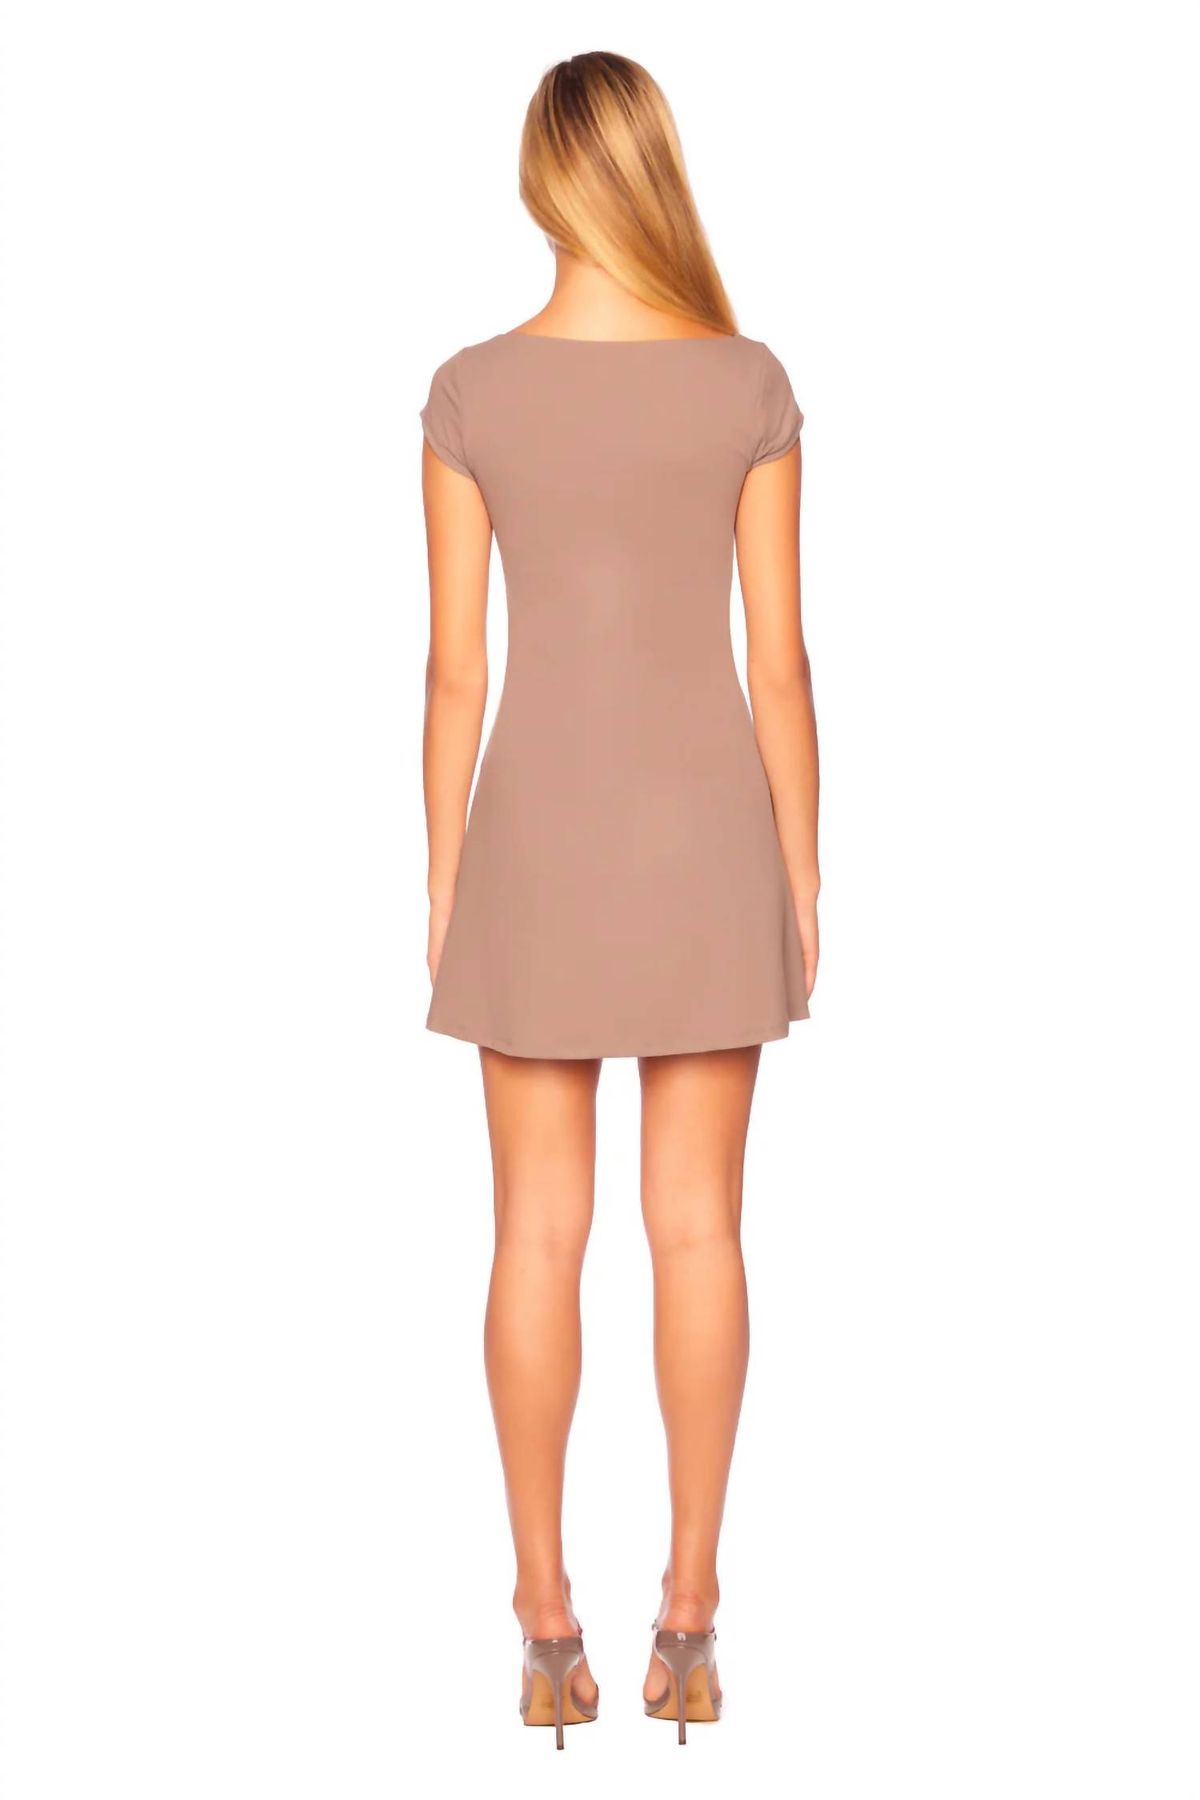 Style 1-3199139858-3855 Susana Monaco Size XS Cap Sleeve Brown Cocktail Dress on Queenly